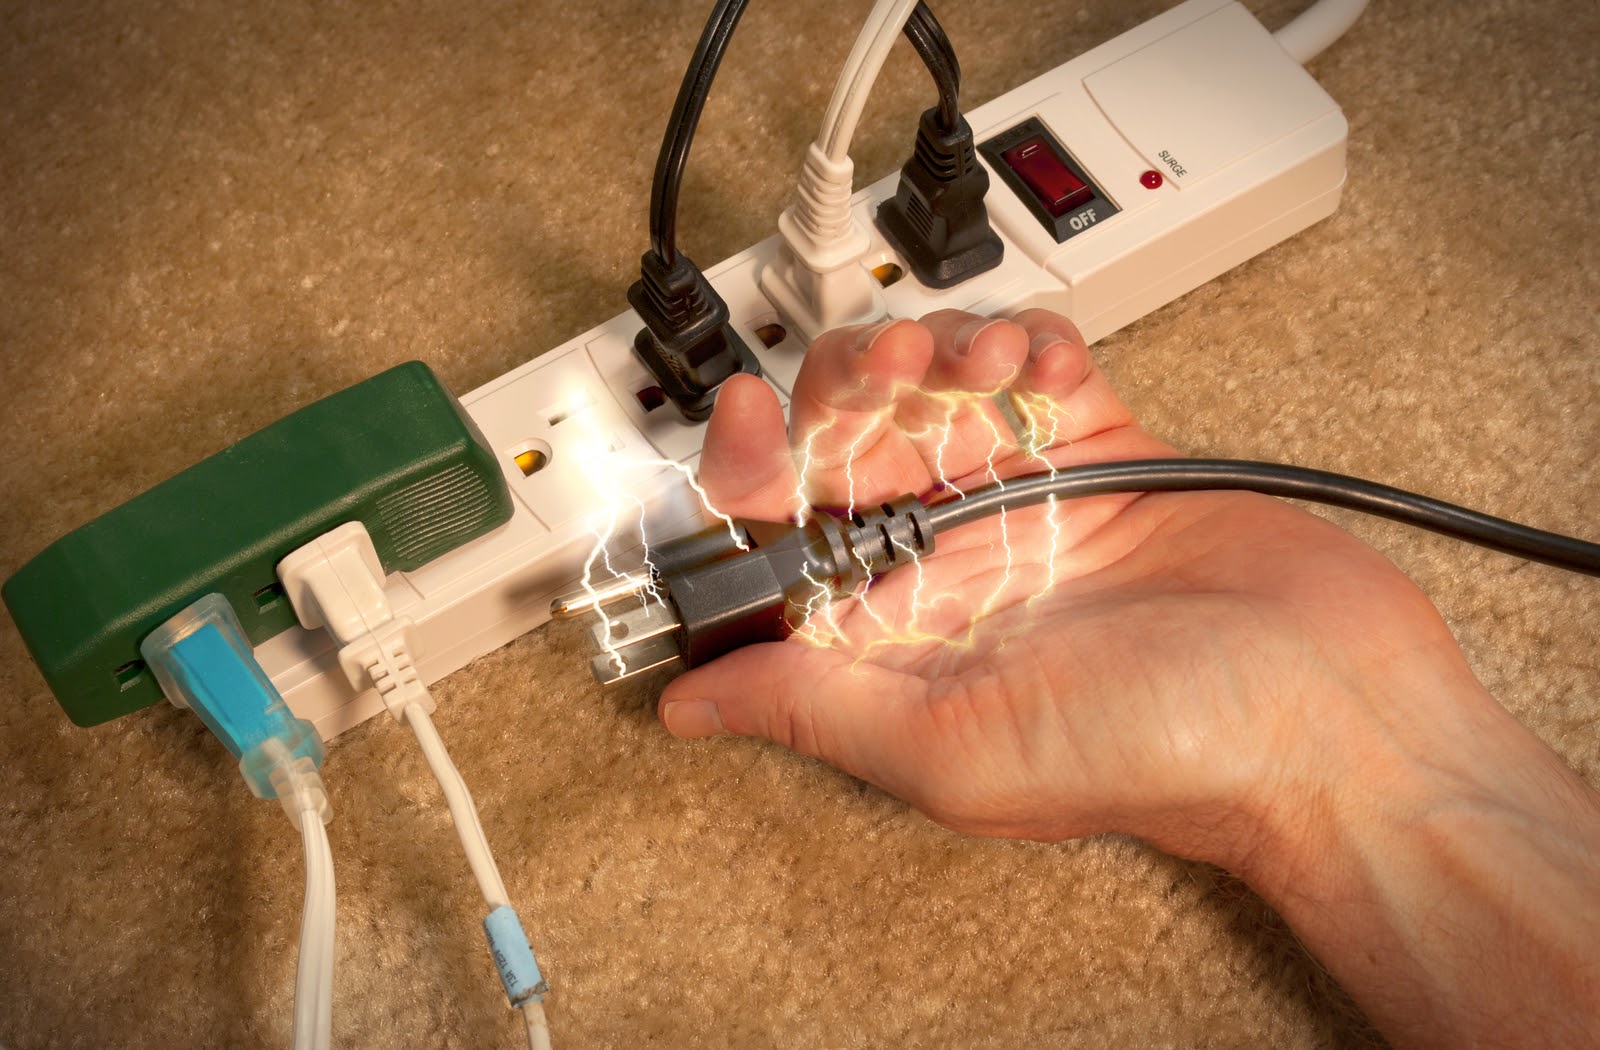 Man experiencing electrocution after removing electric plug at home